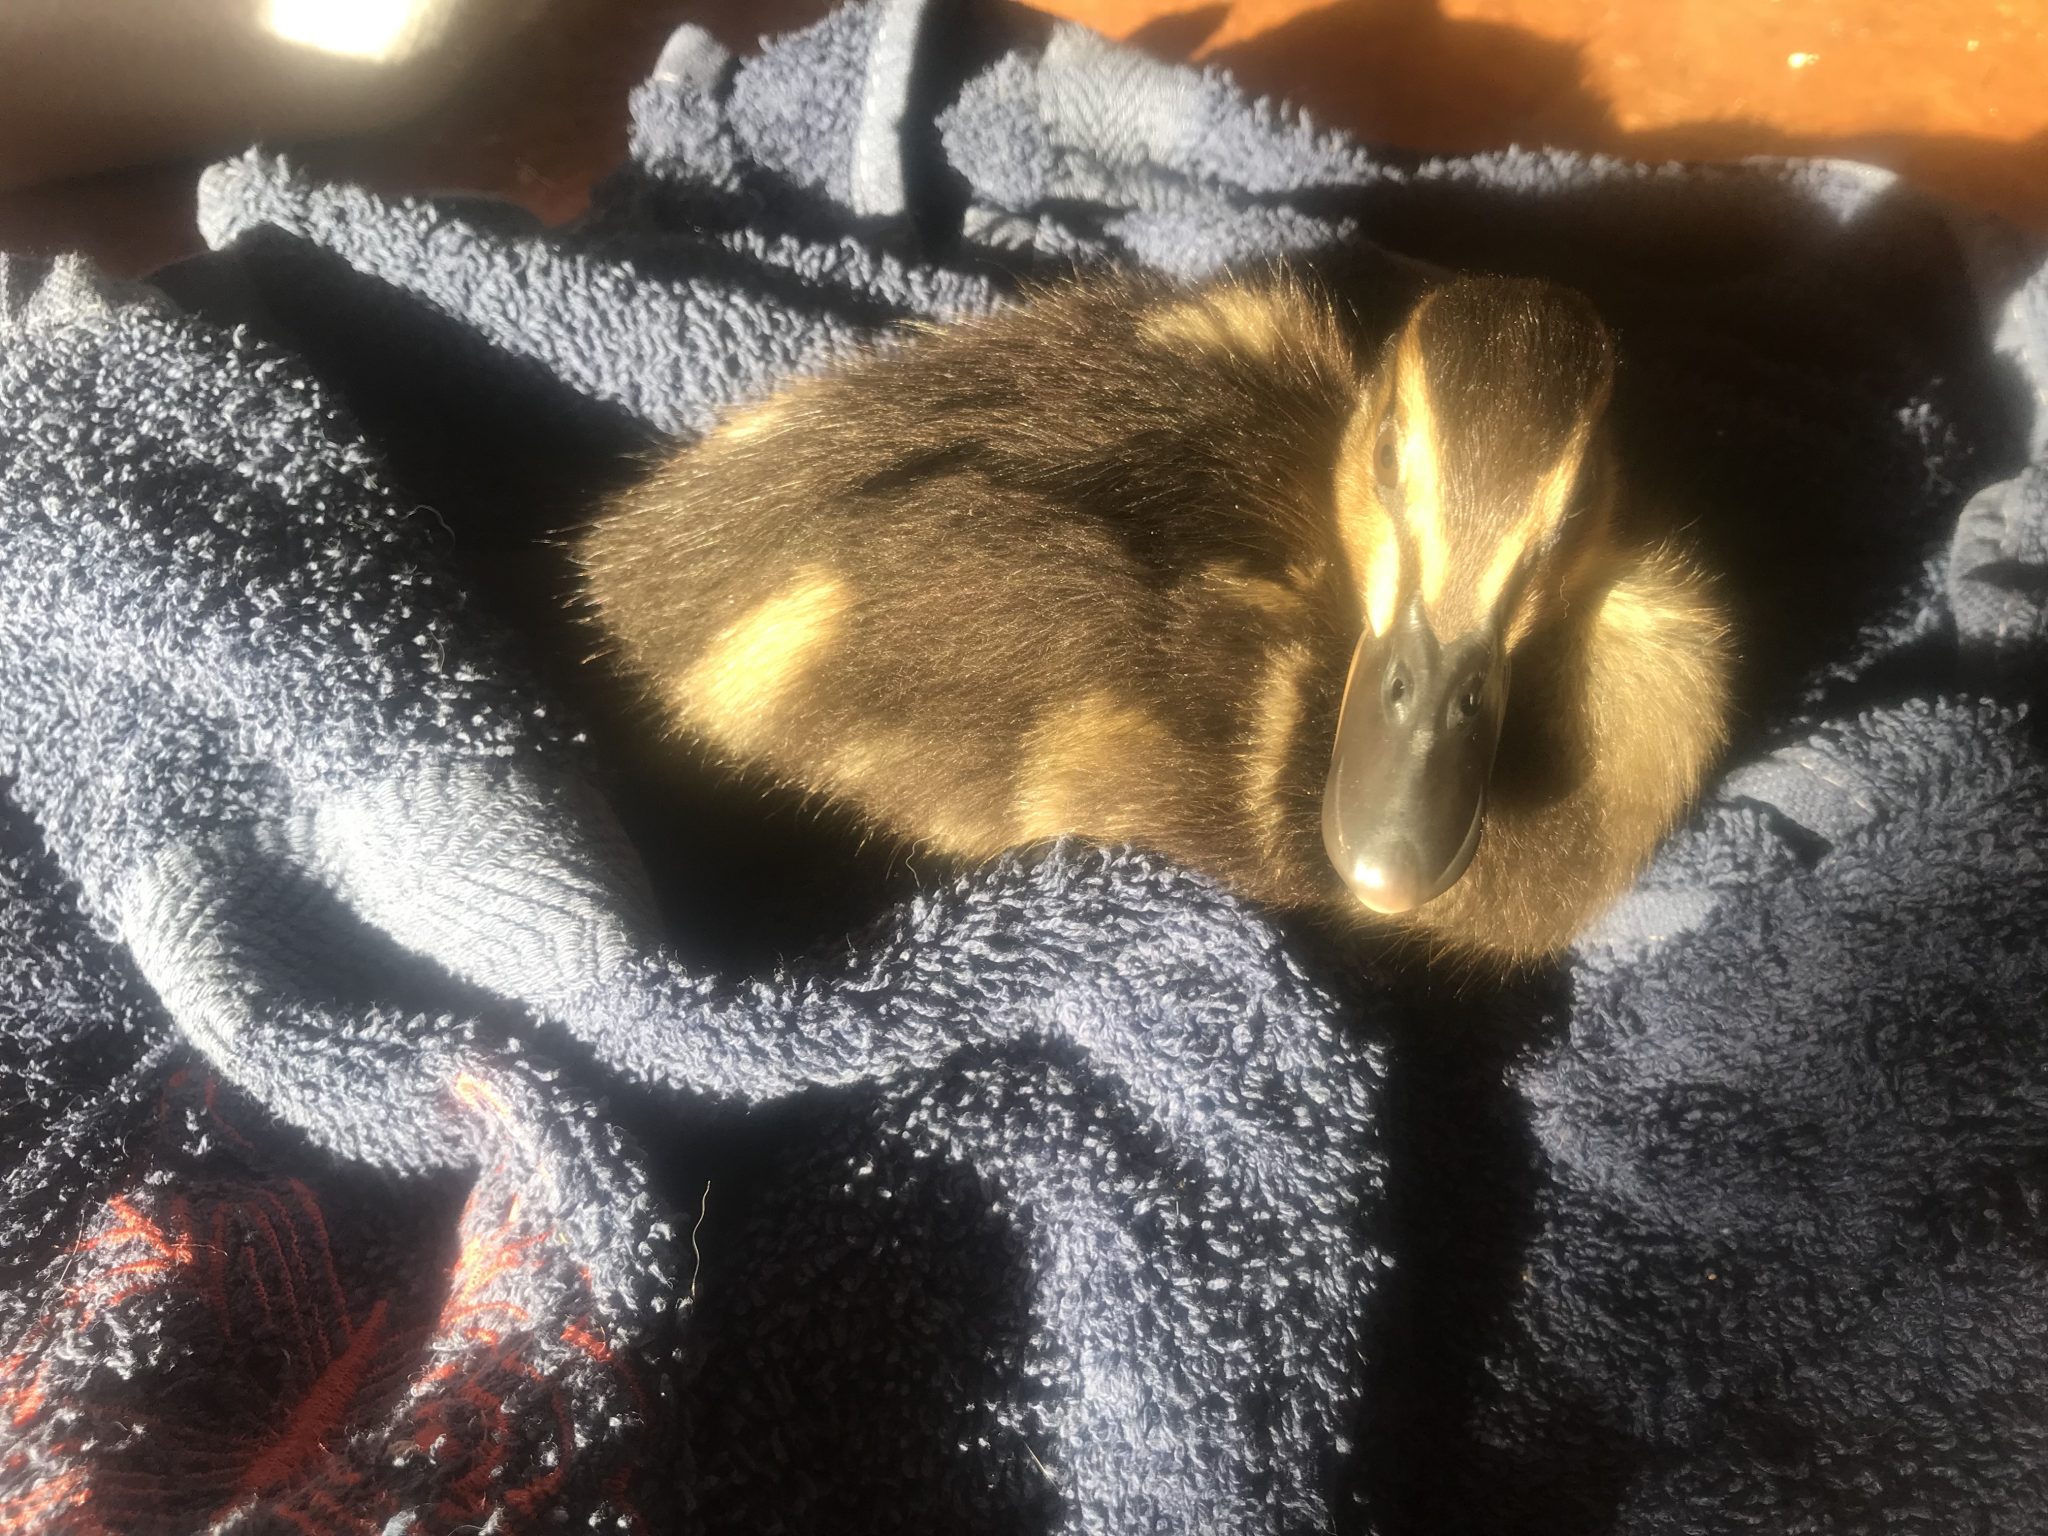 Fluffy duckling wrapped up in a towel